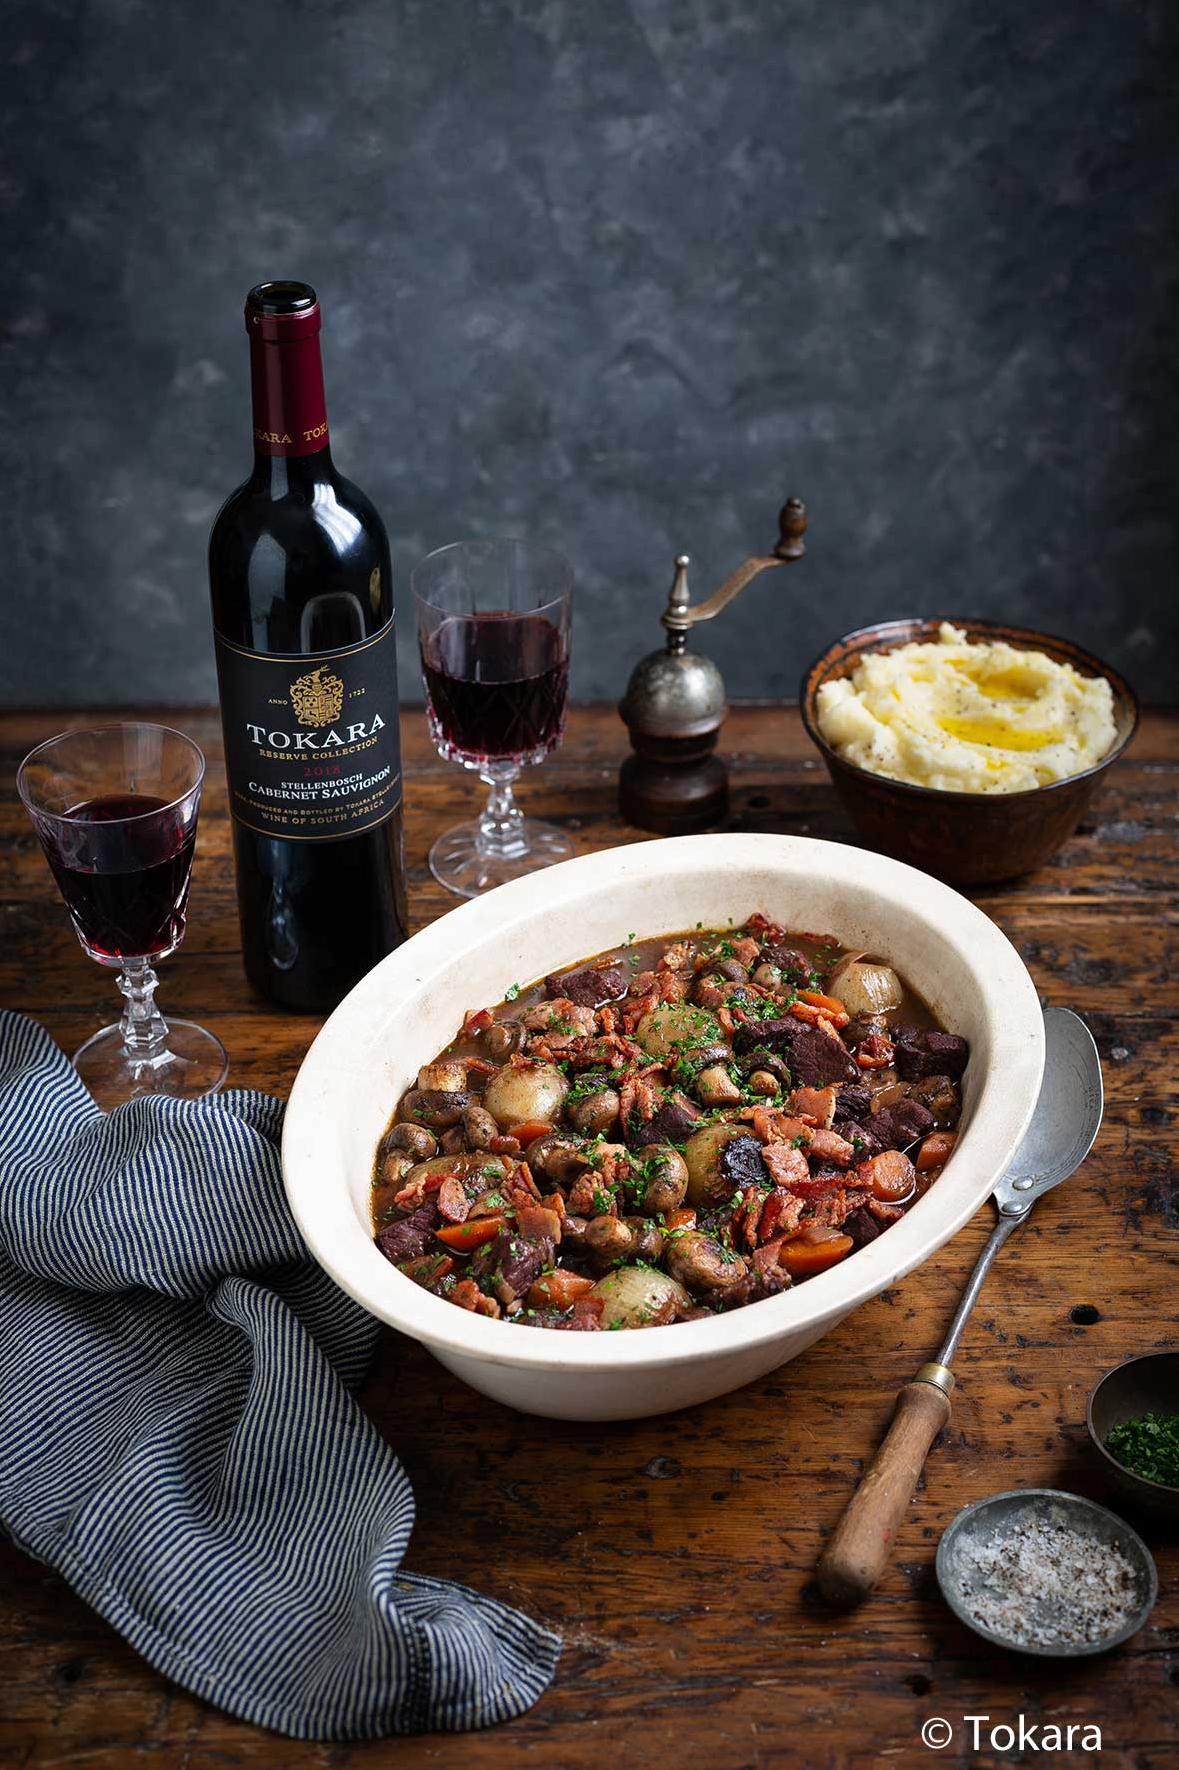  The perfect comfort food on a chilly evening - Goulash with Red Wine!